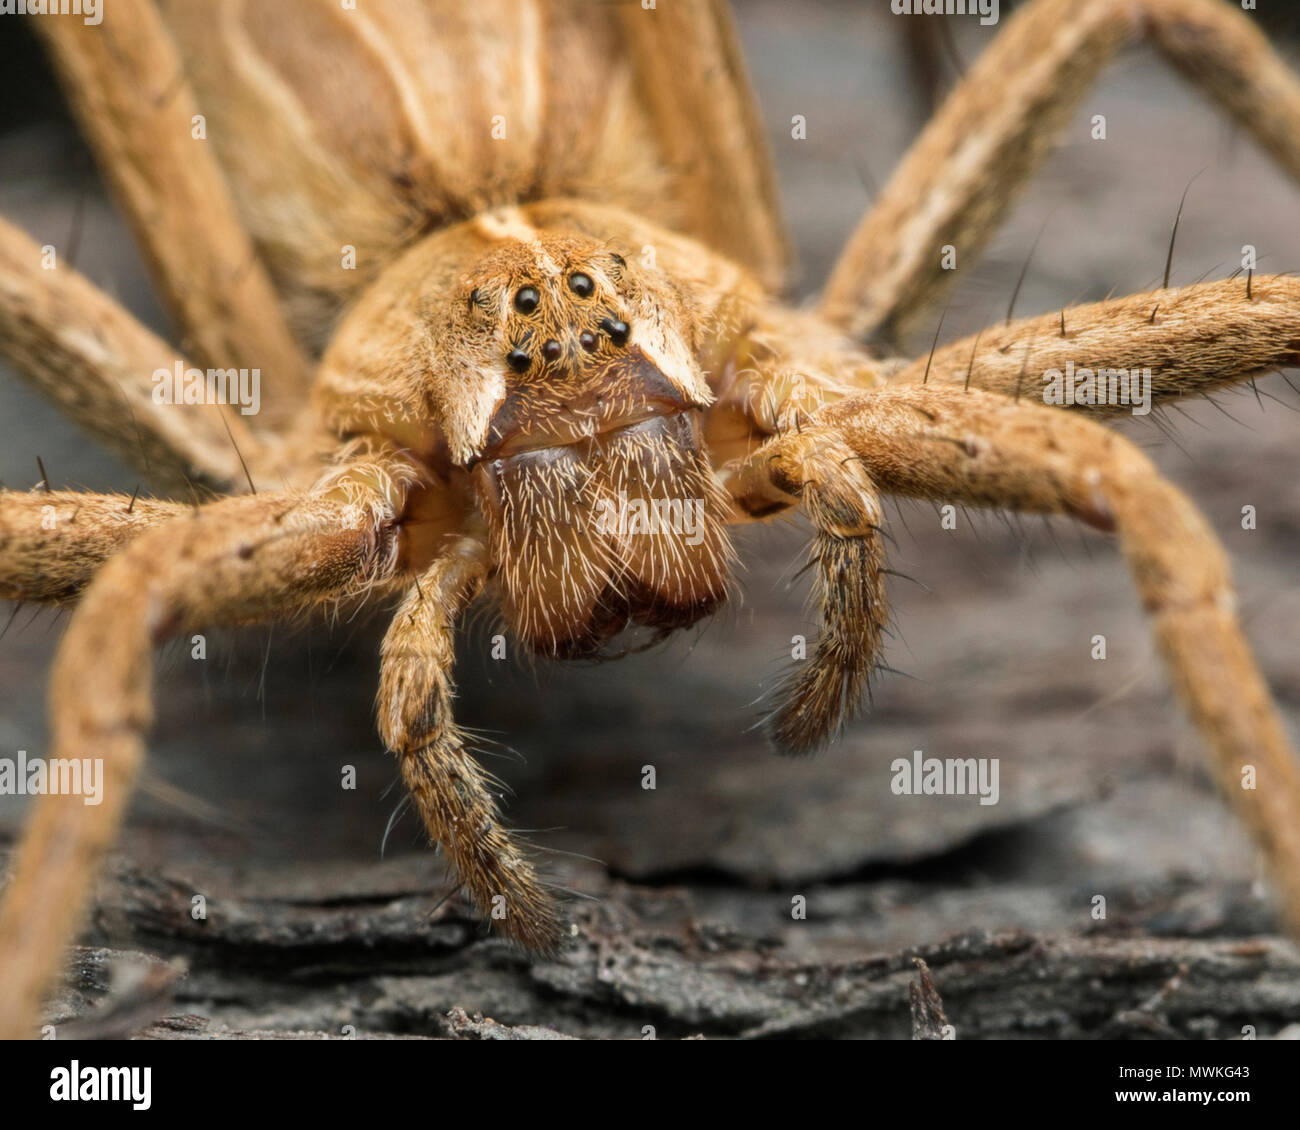 Nursery web spider (Pisaura mirabilis) close up of the face and head. Tipperary, Ireland Stock Photo